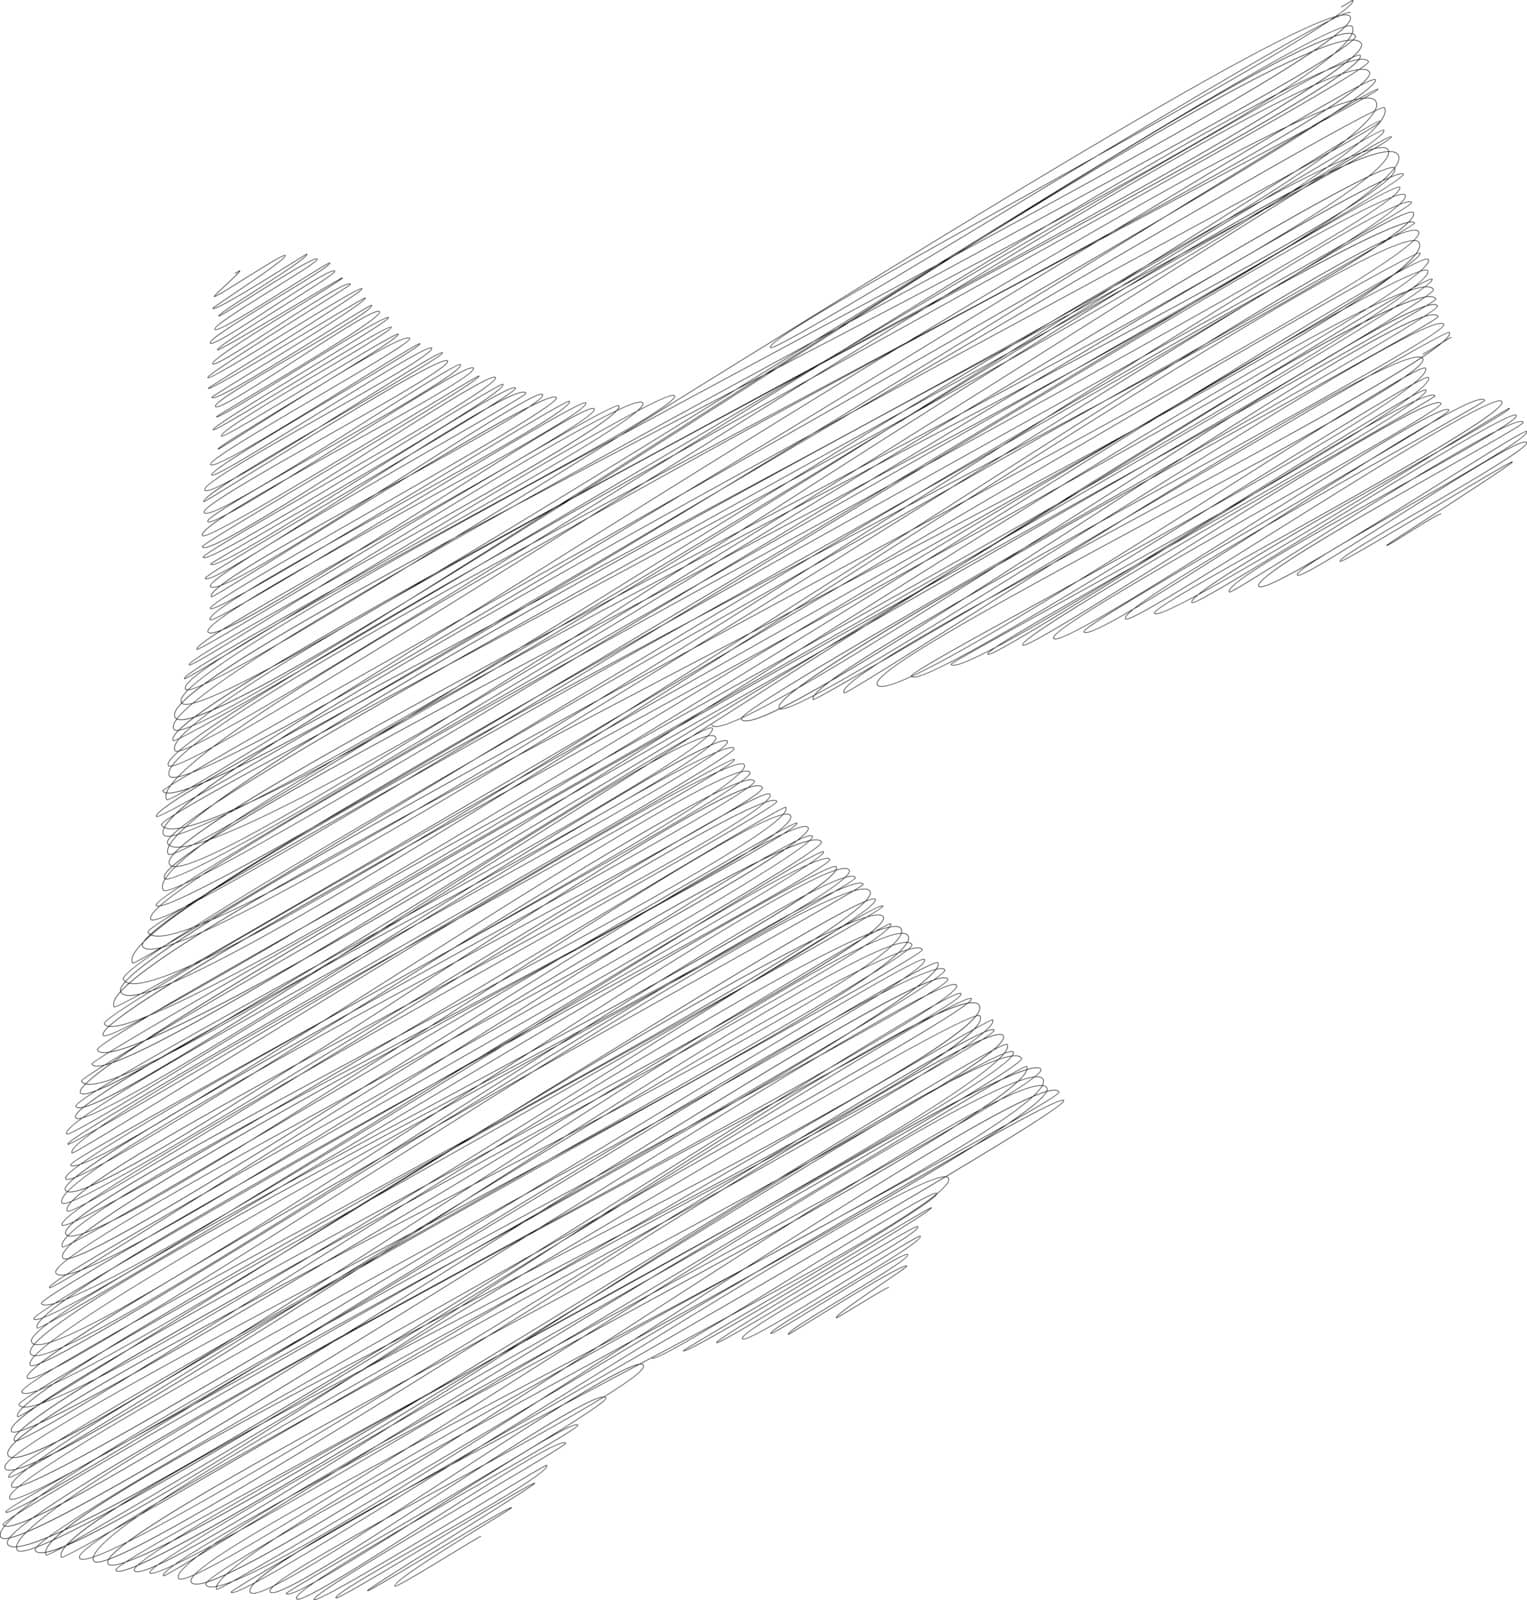 Jordan - pencil scribble sketch silhouette map of country area with dropped shadow. Simple flat vector illustration.